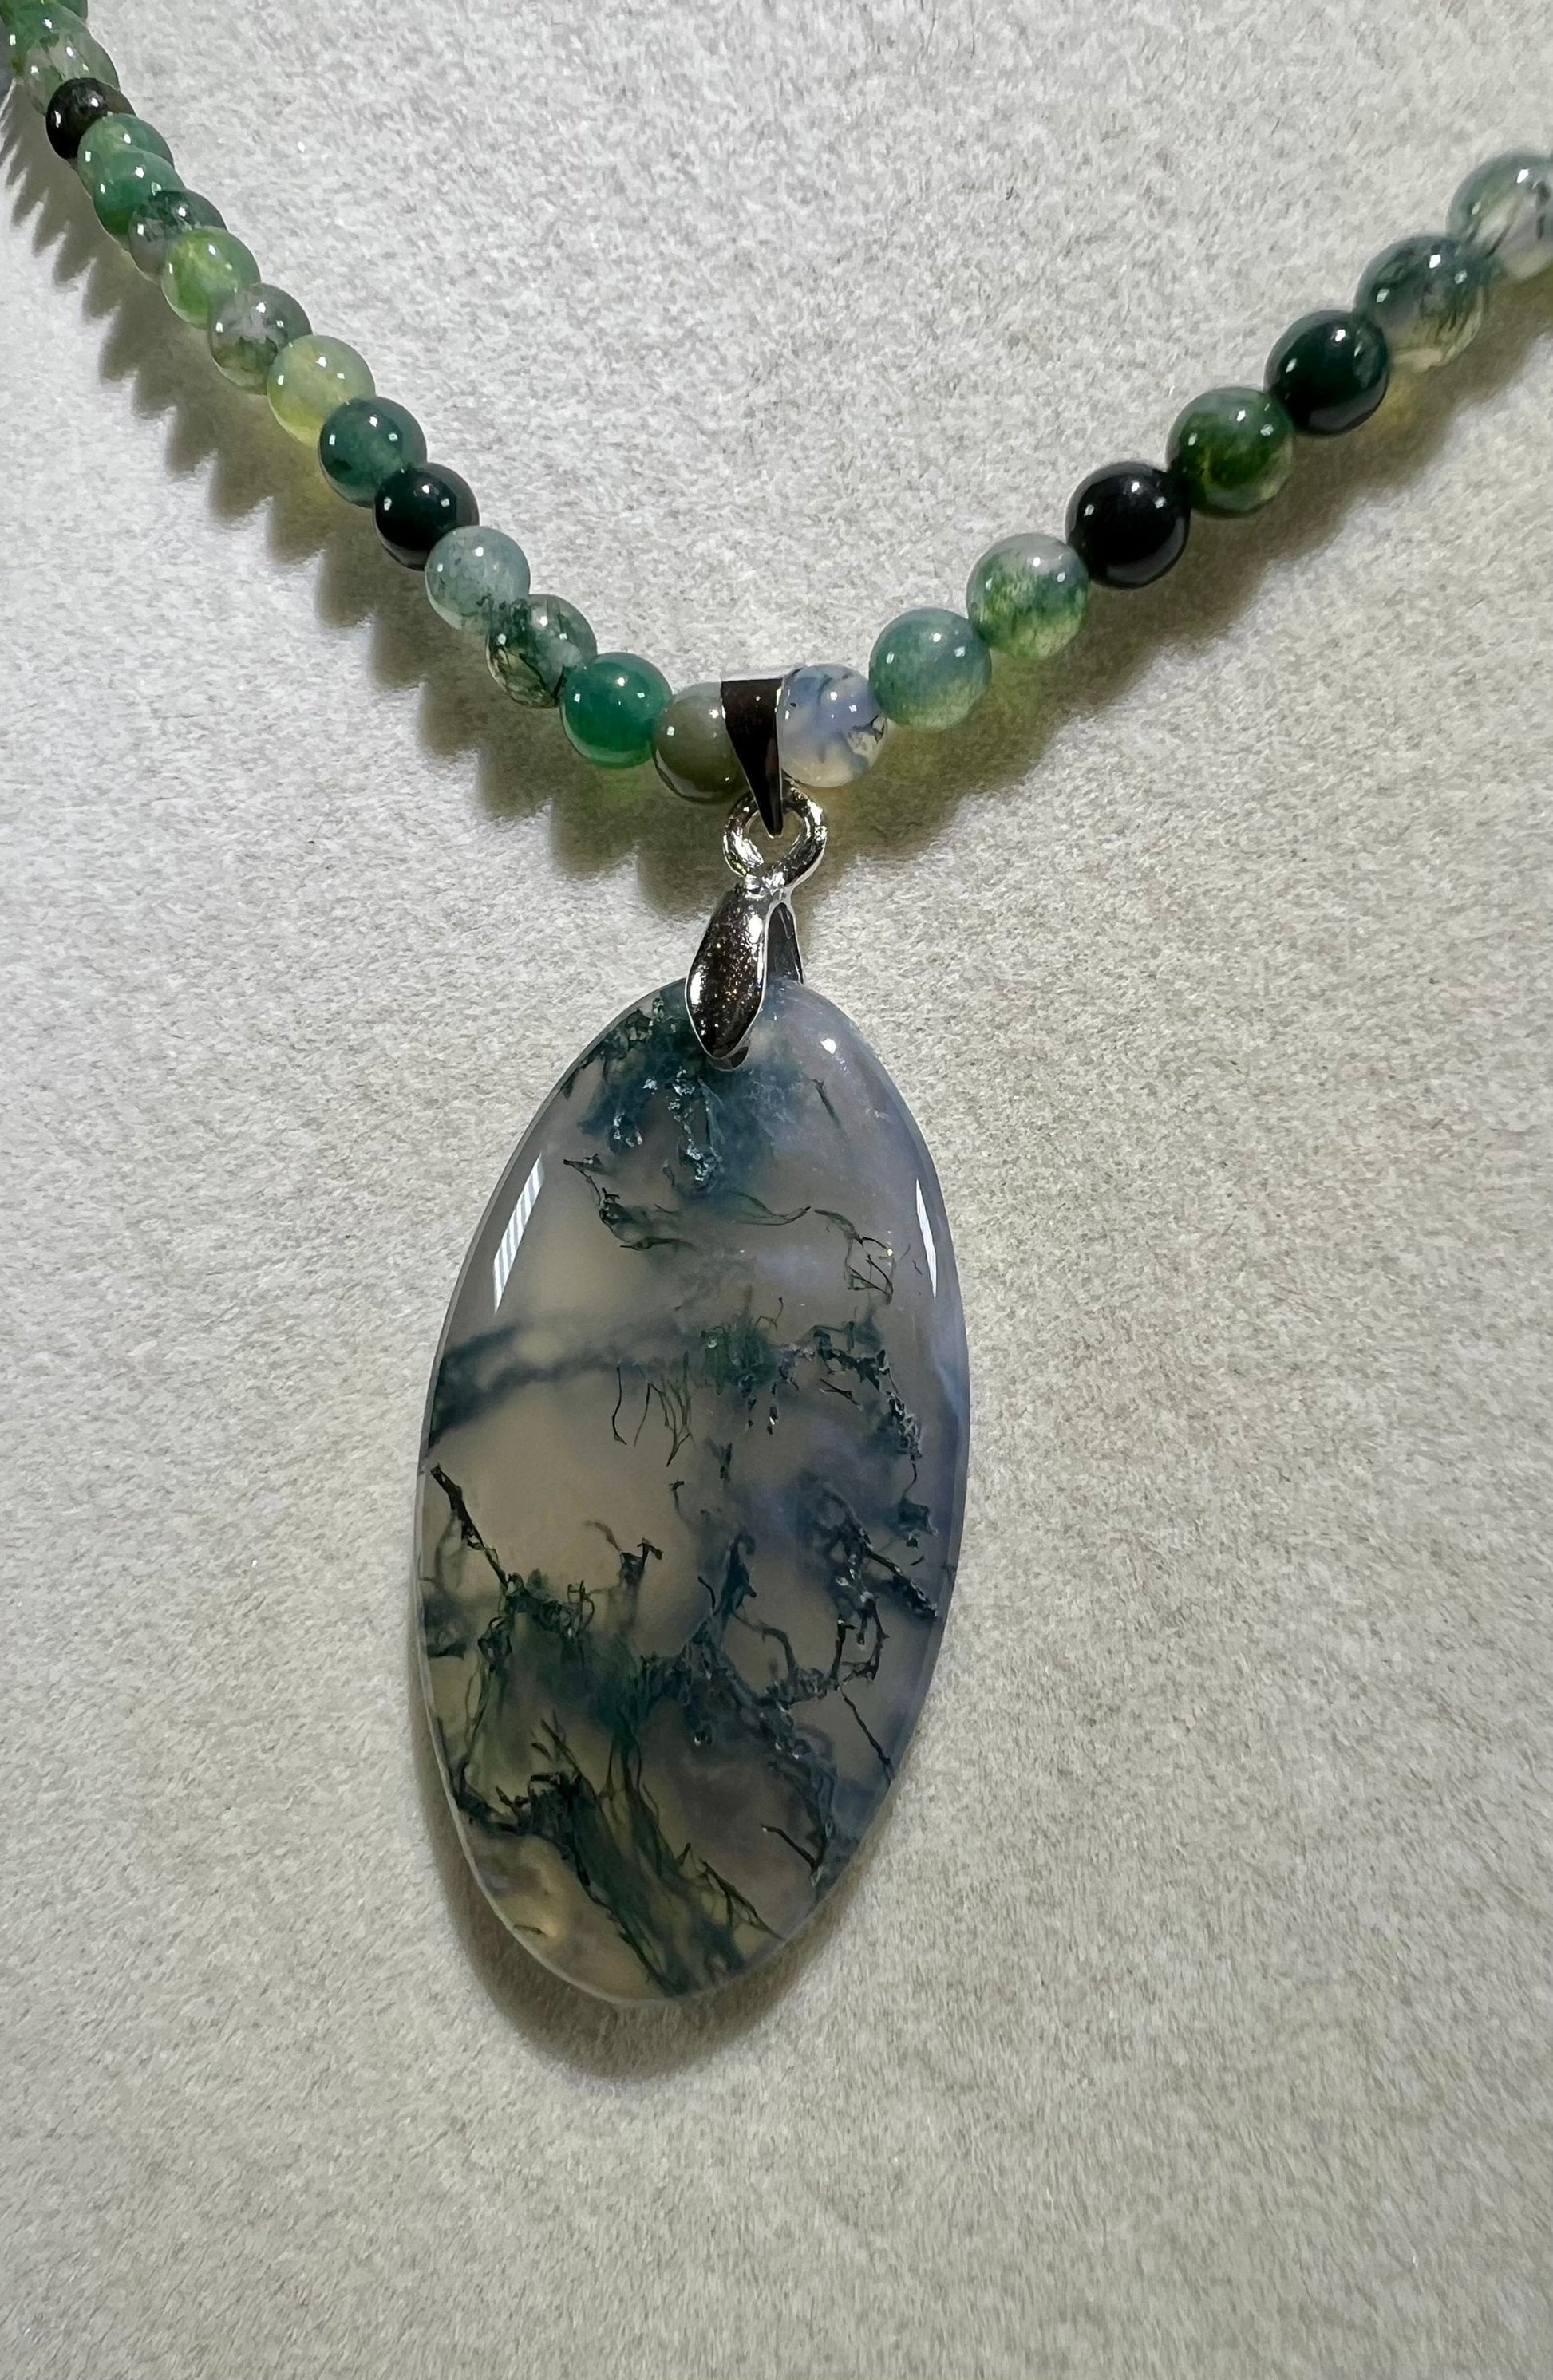 Amazing Moss Agate Crystal Pendant. Custom Made Moss Agate Bead Necklace. High Quality Crystal Necklace